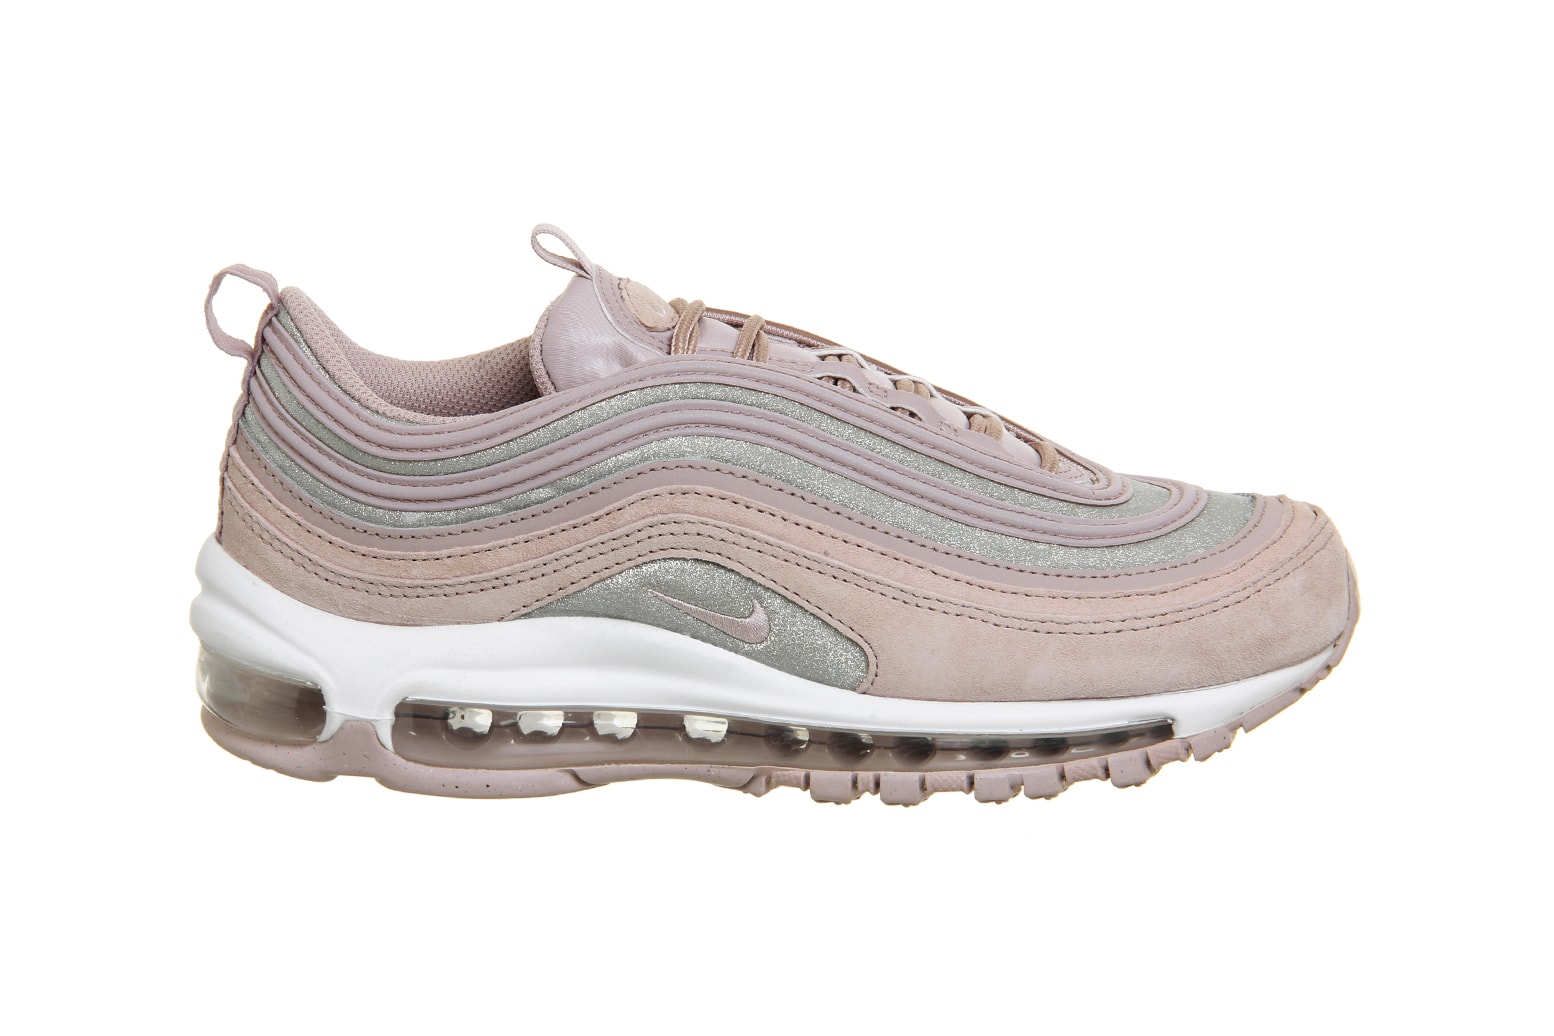 Nike Air Max 97 Particle Rose Pink Silver Glitter Women's Sneakers